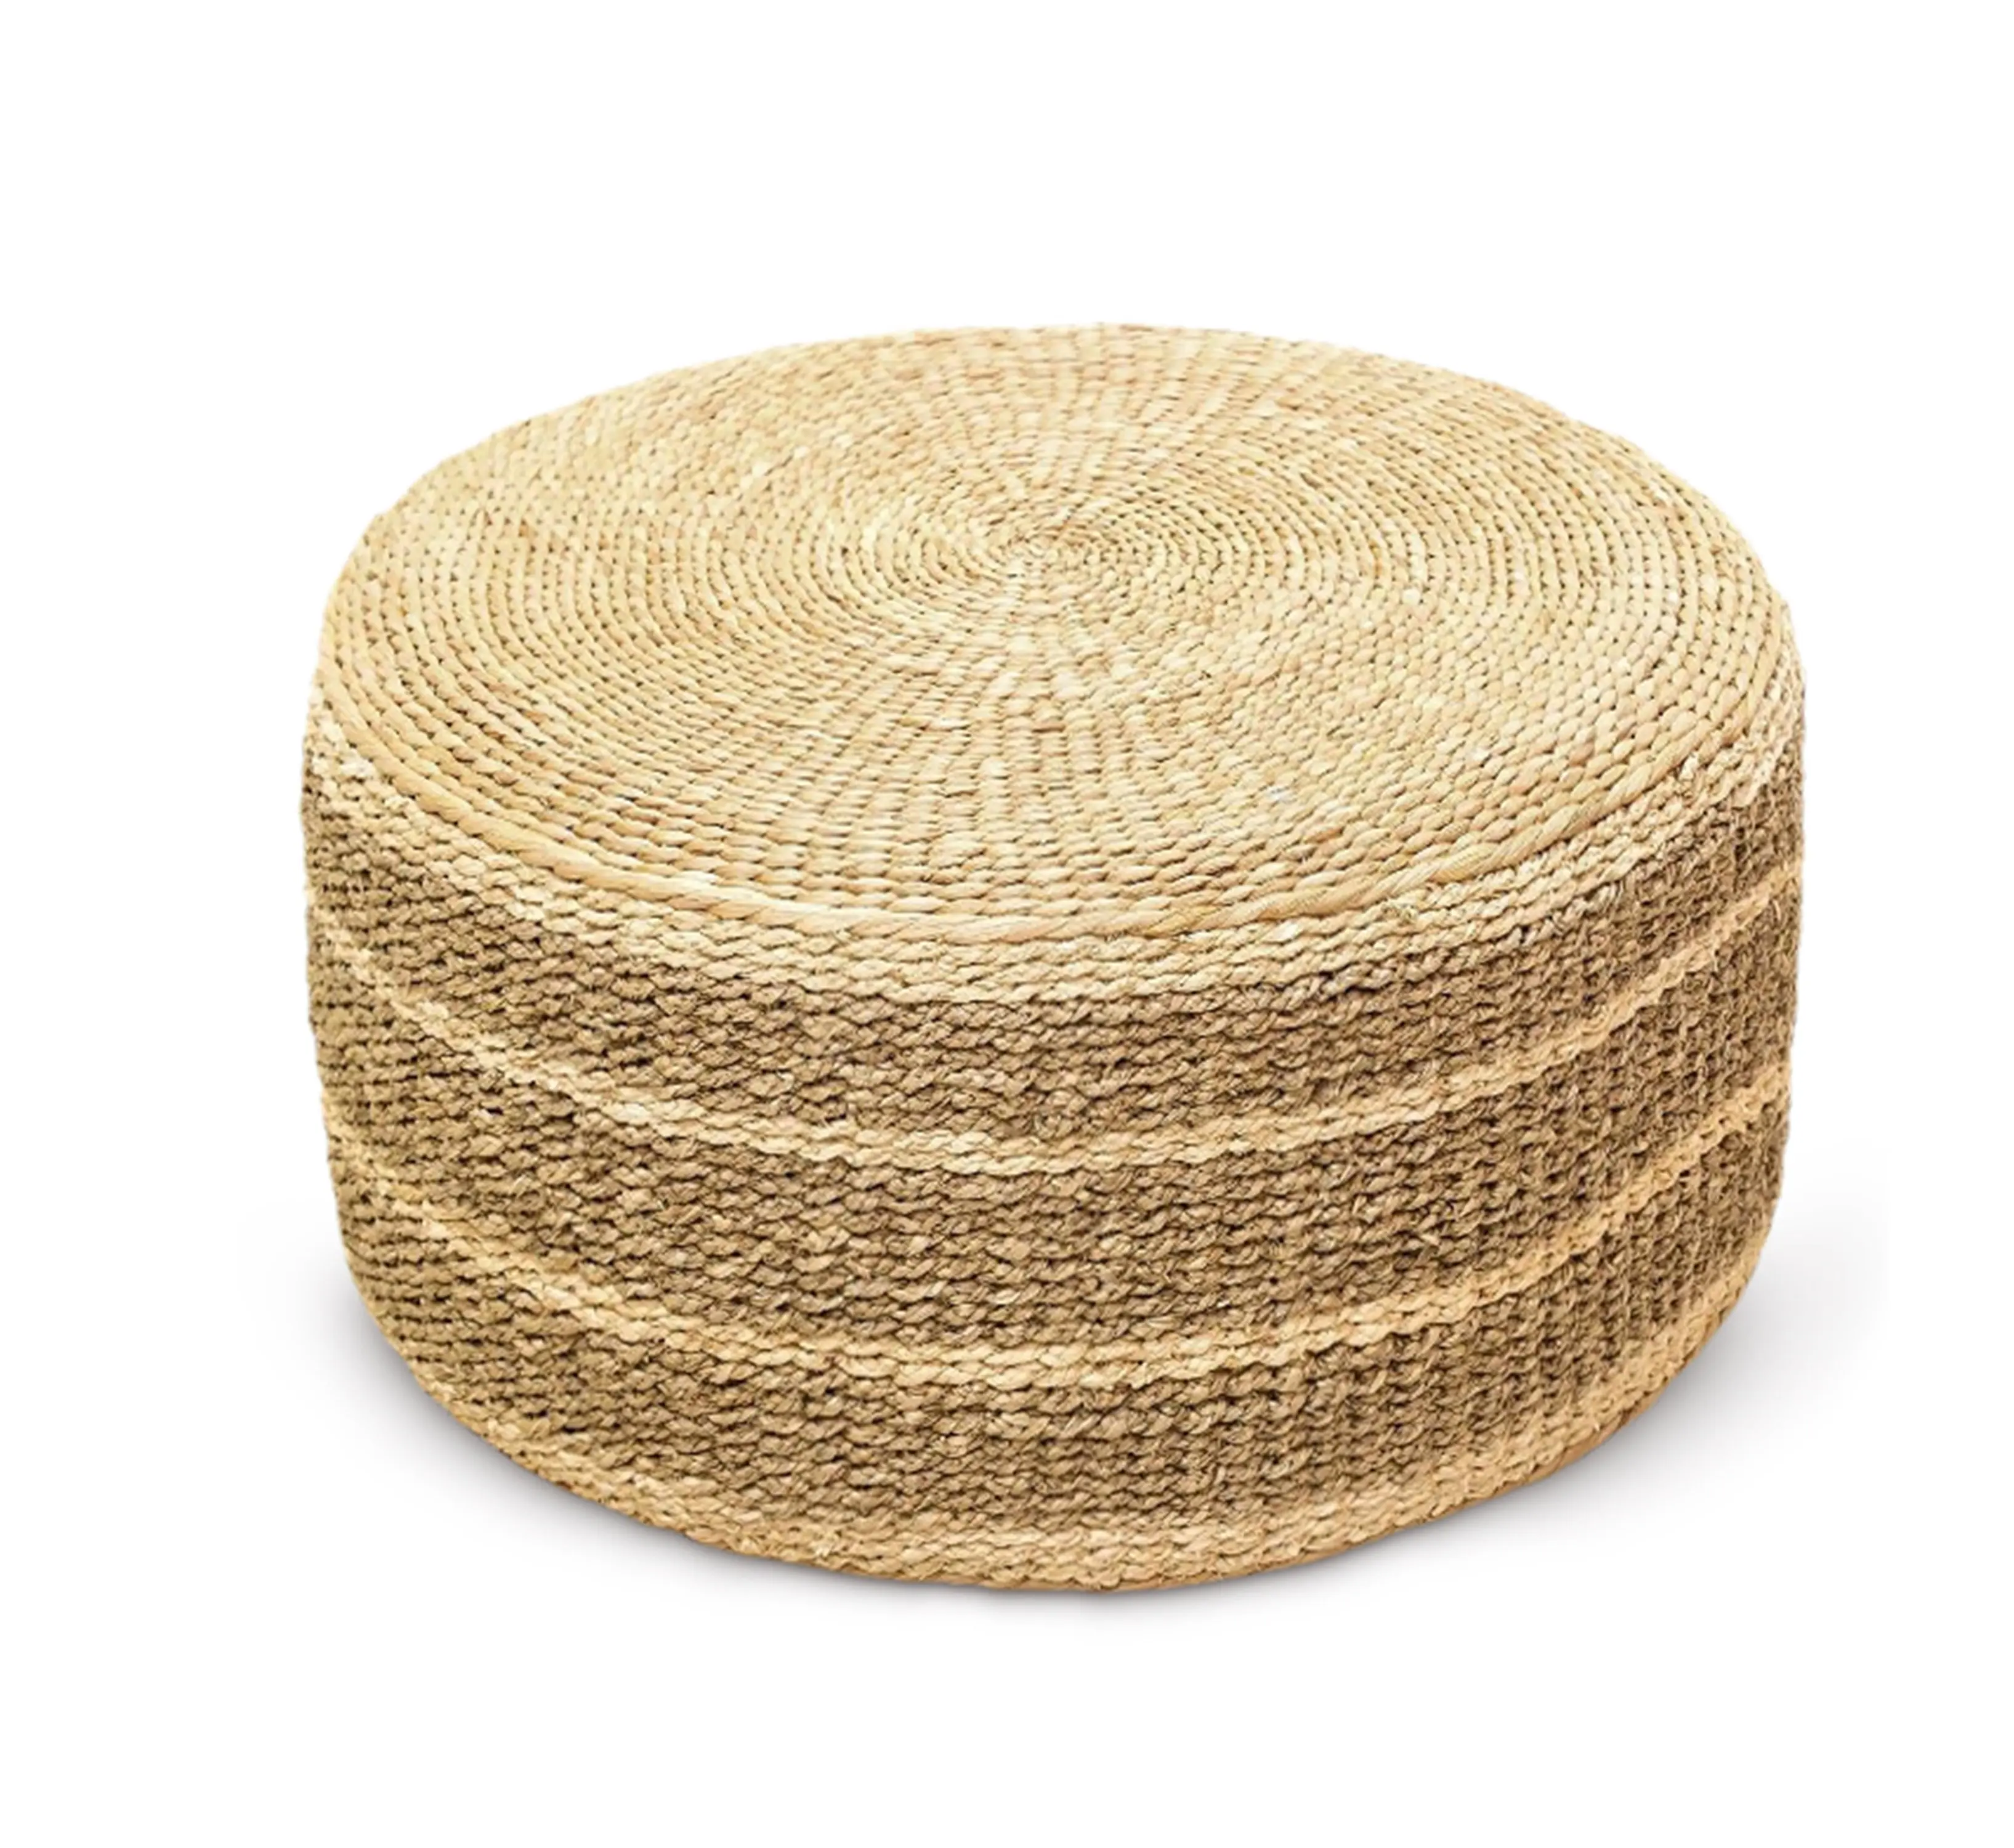 Cheapest Soothing Handmade Pouf Seagrass Straw Flat Seat Floor Cushion Seating And Meditation Stool Made In Vietnam